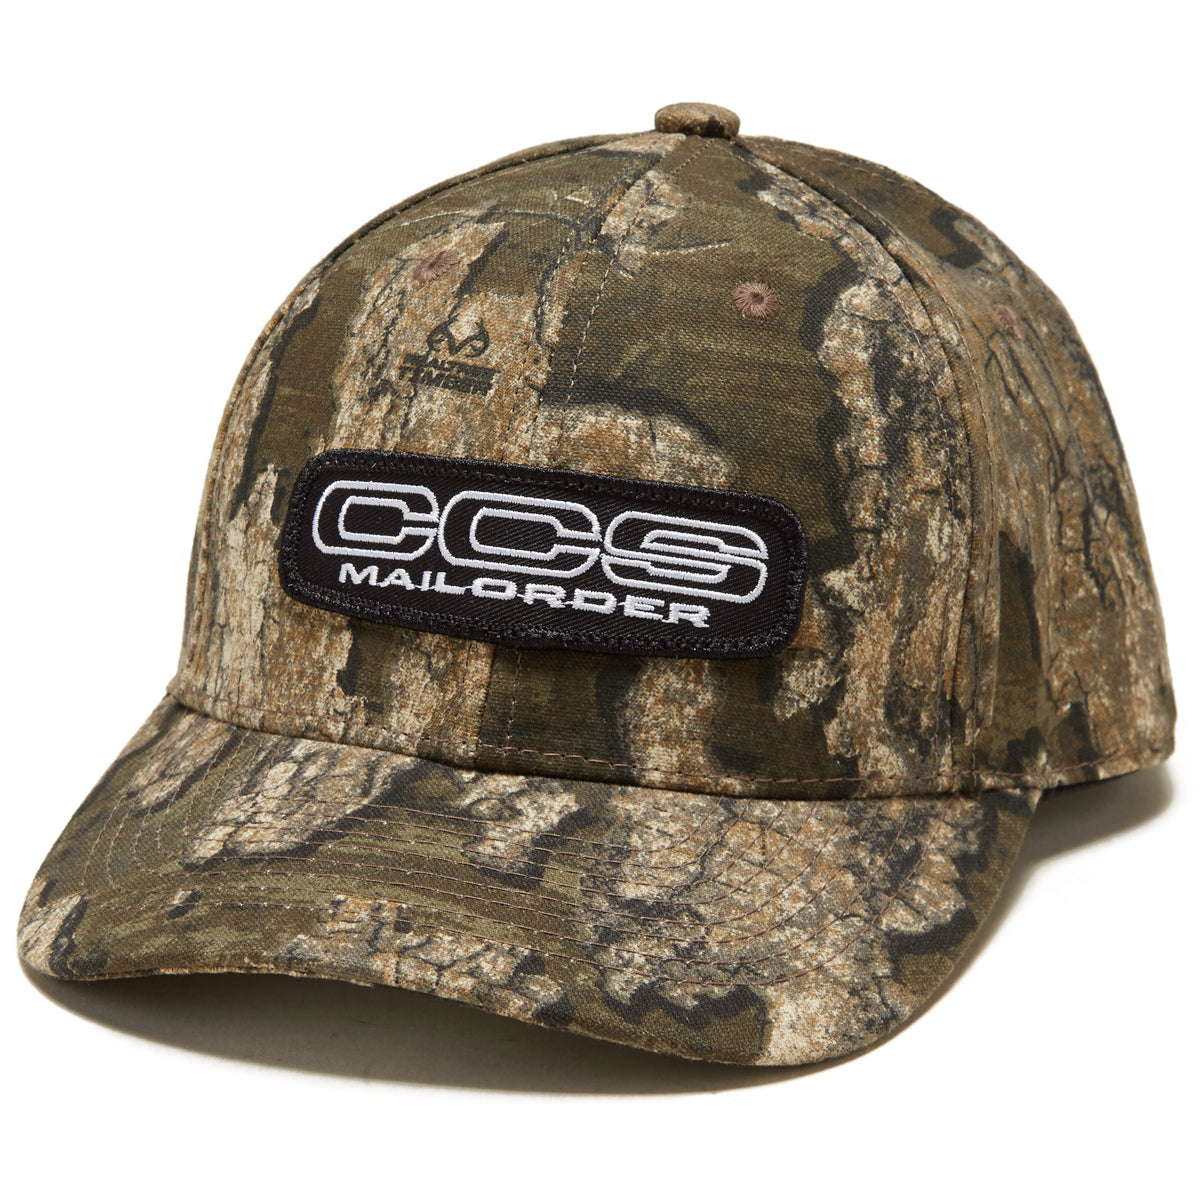 CCS x Realtree Mailorder Patch Hat - Timber image 1